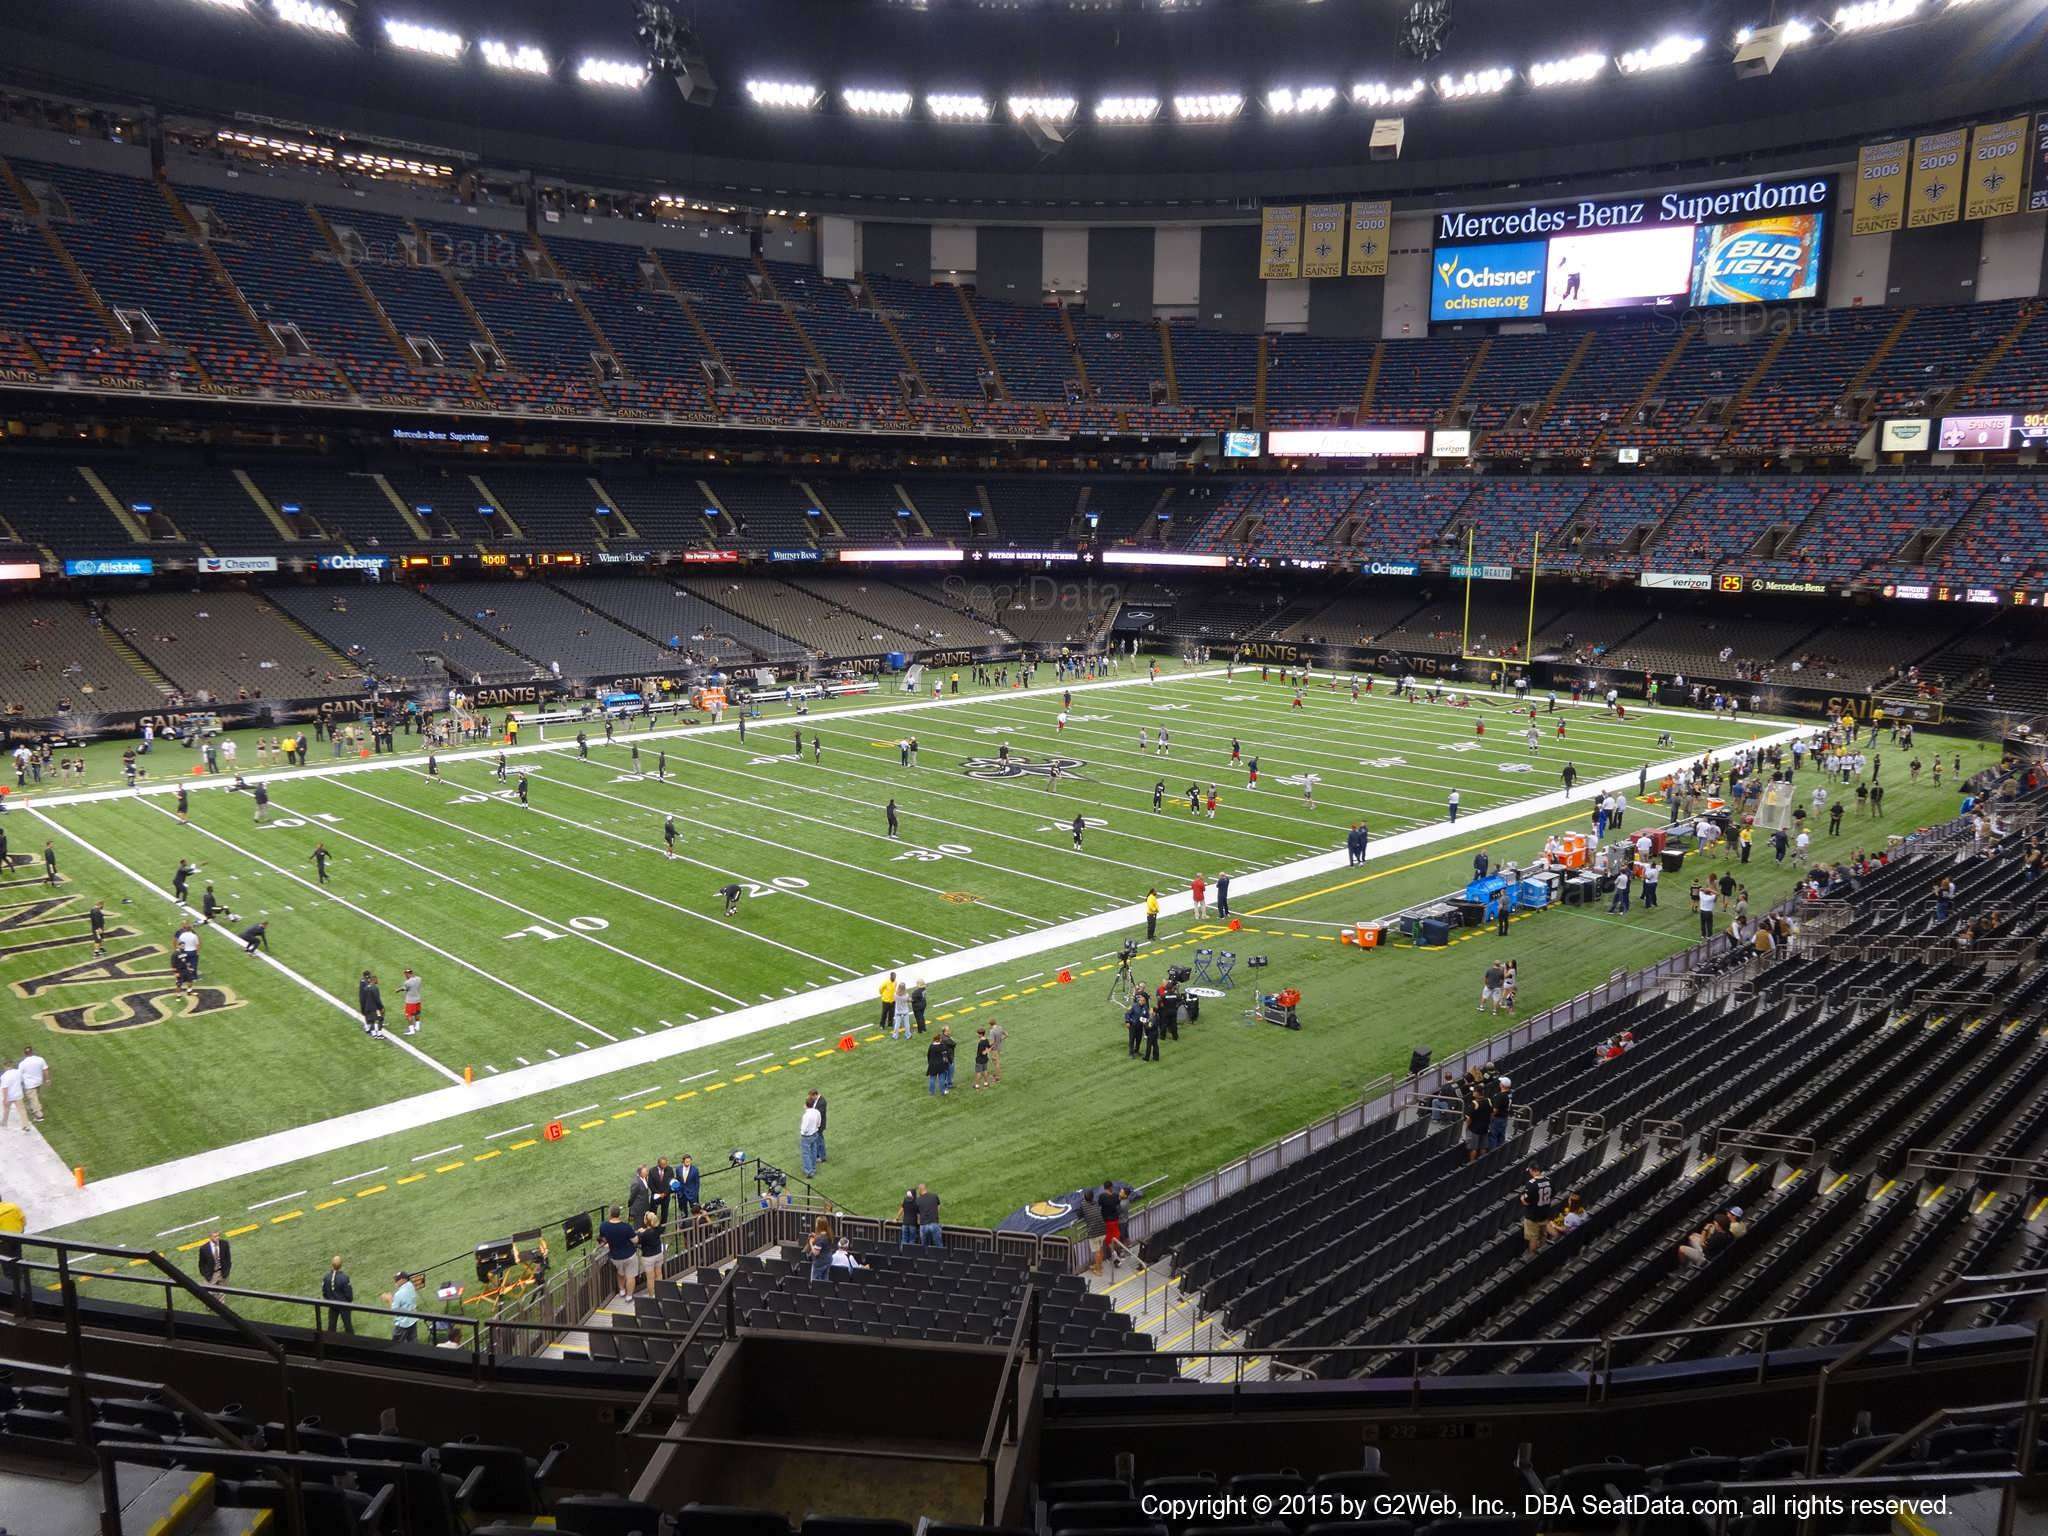 Seat view from section 318 at the Mercedes-Benz Superdome, home of the New Orleans Saints